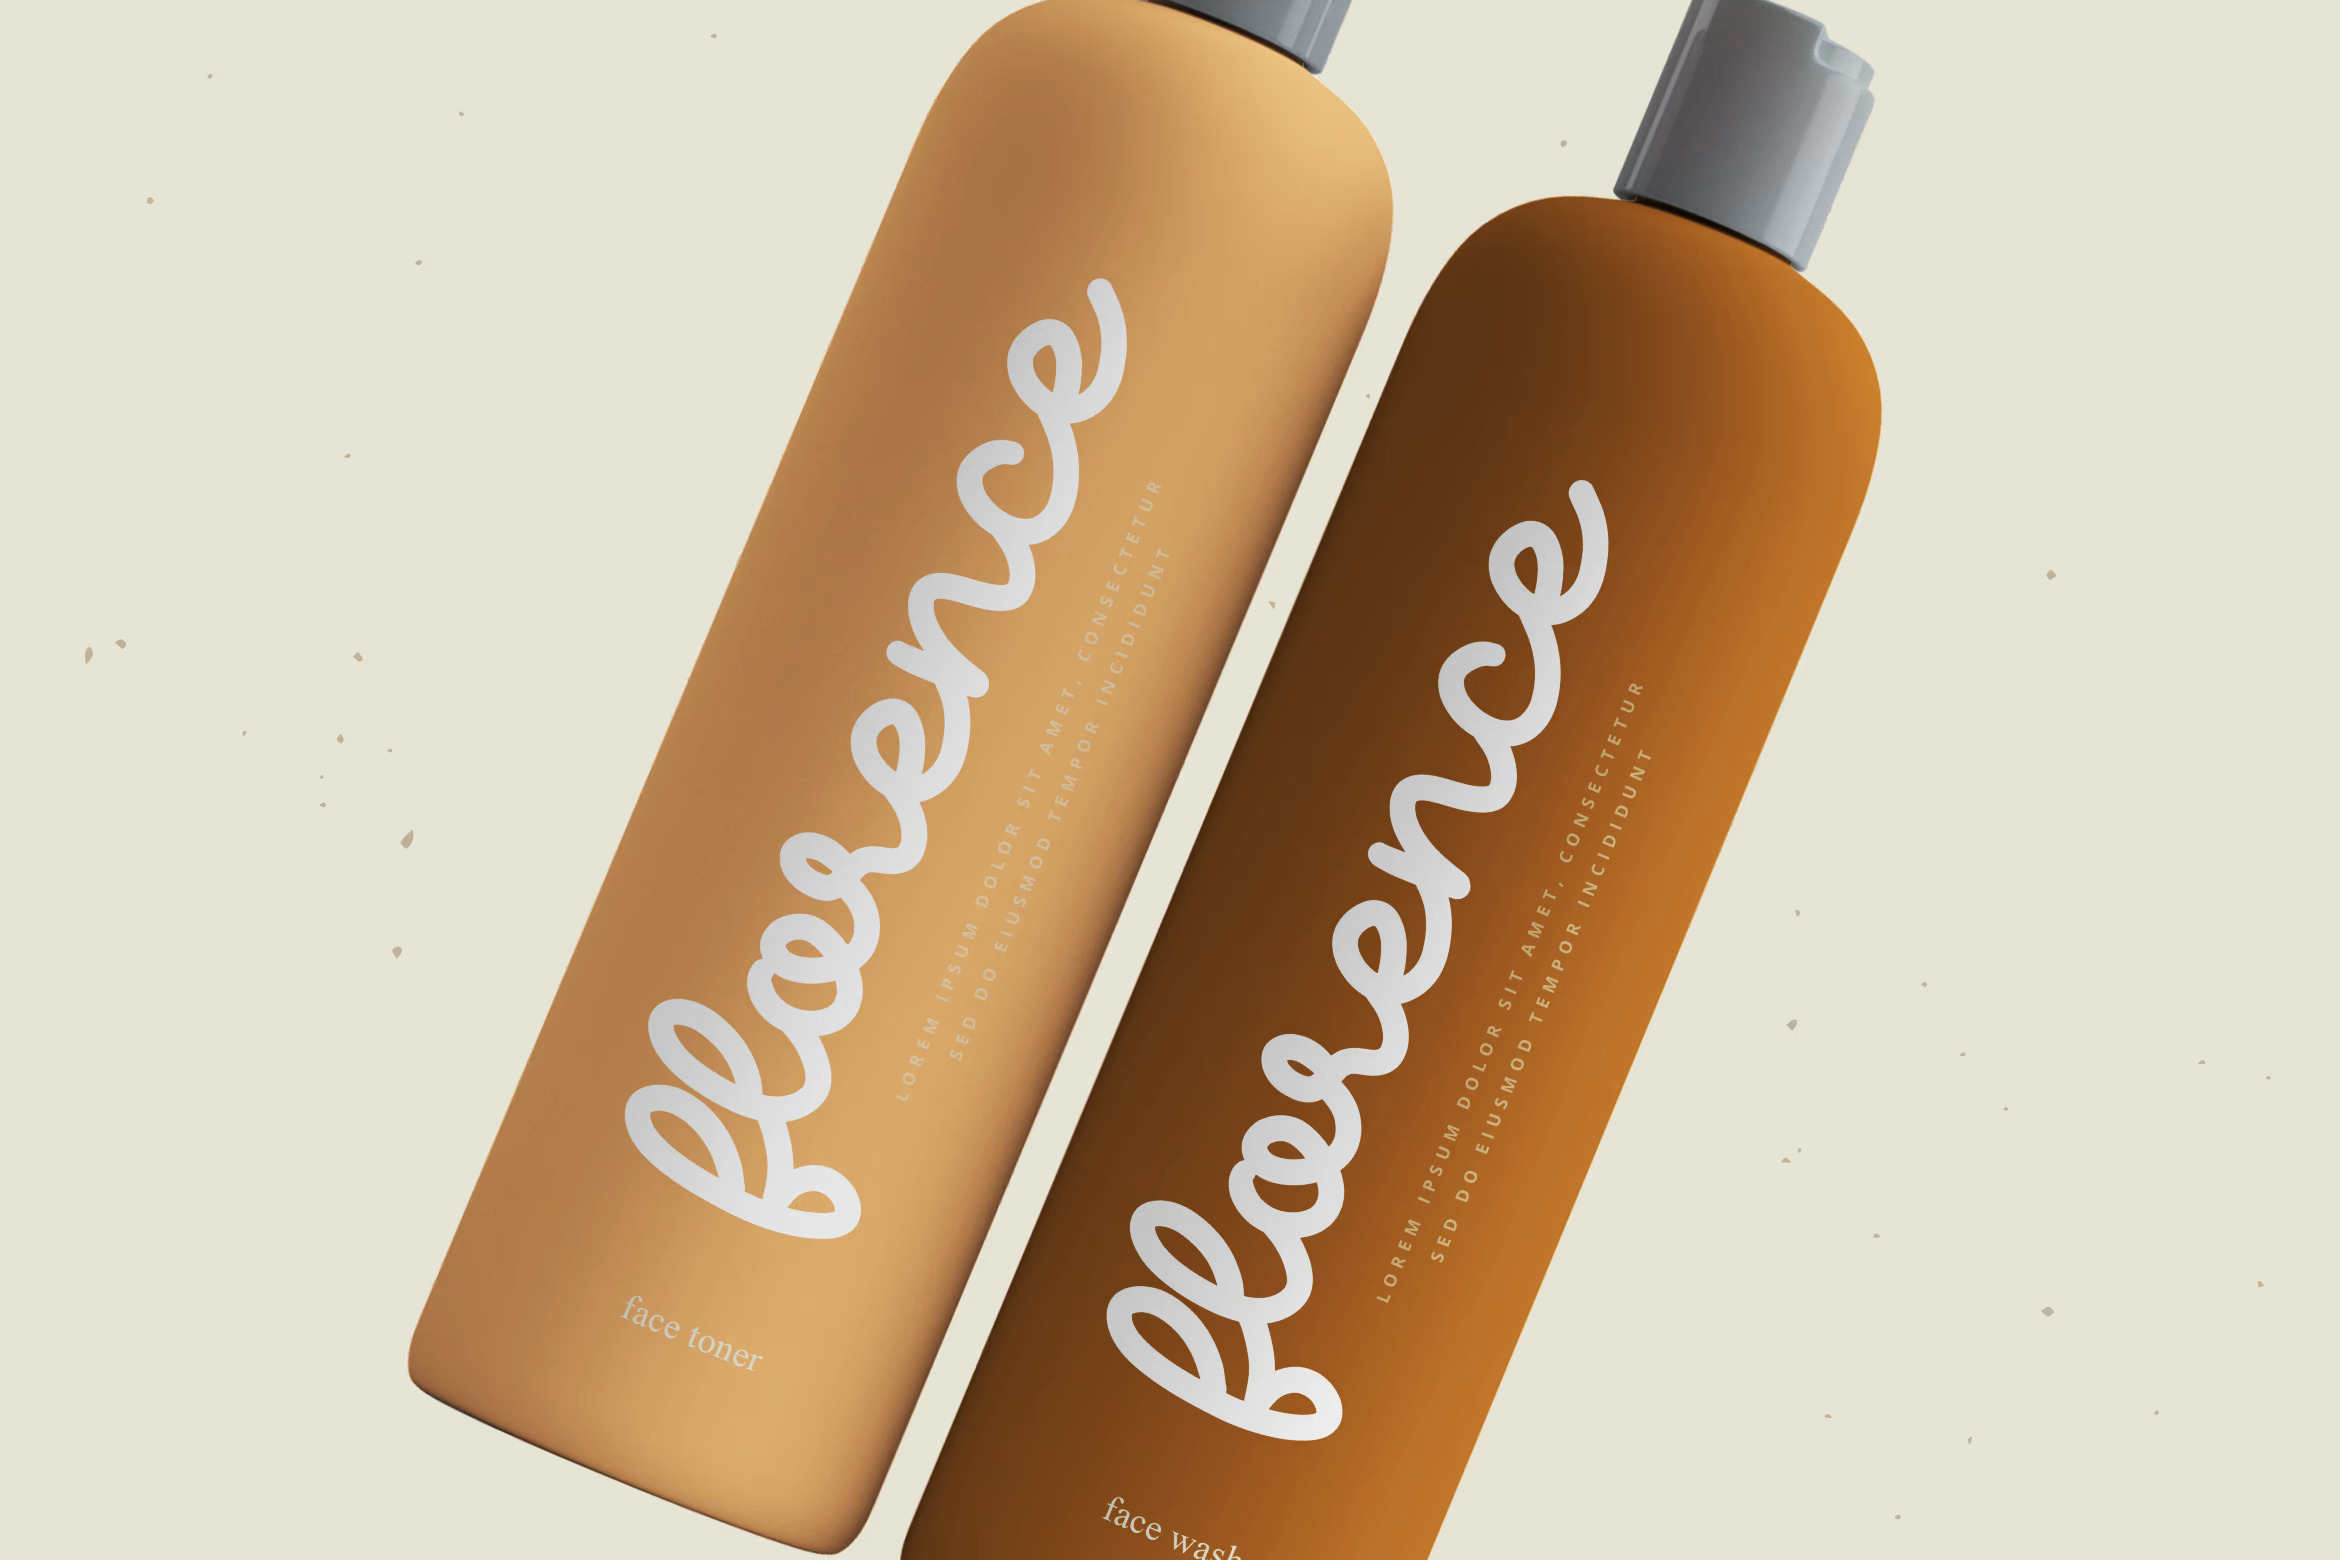 Matte beige and brown bottles with the white font.